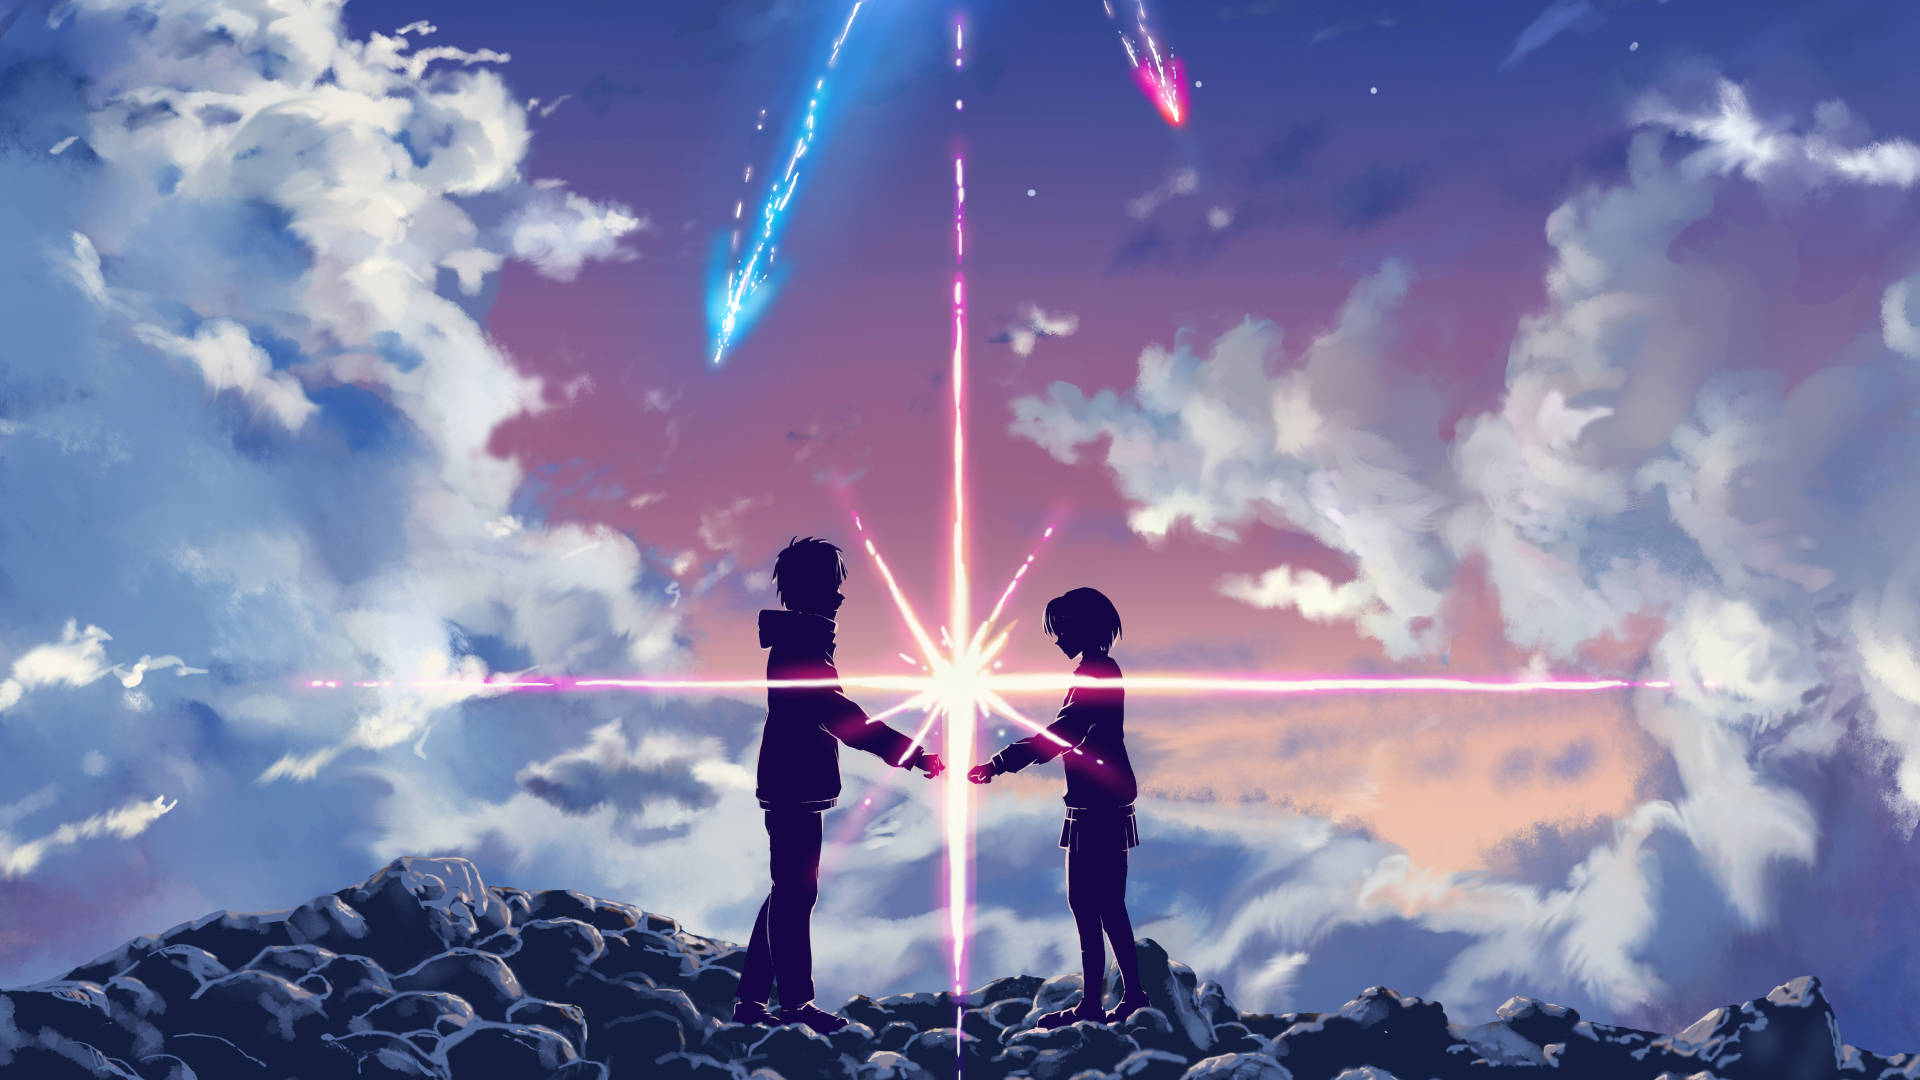 Your Name Anime 2016 Lovers Meeting Comet